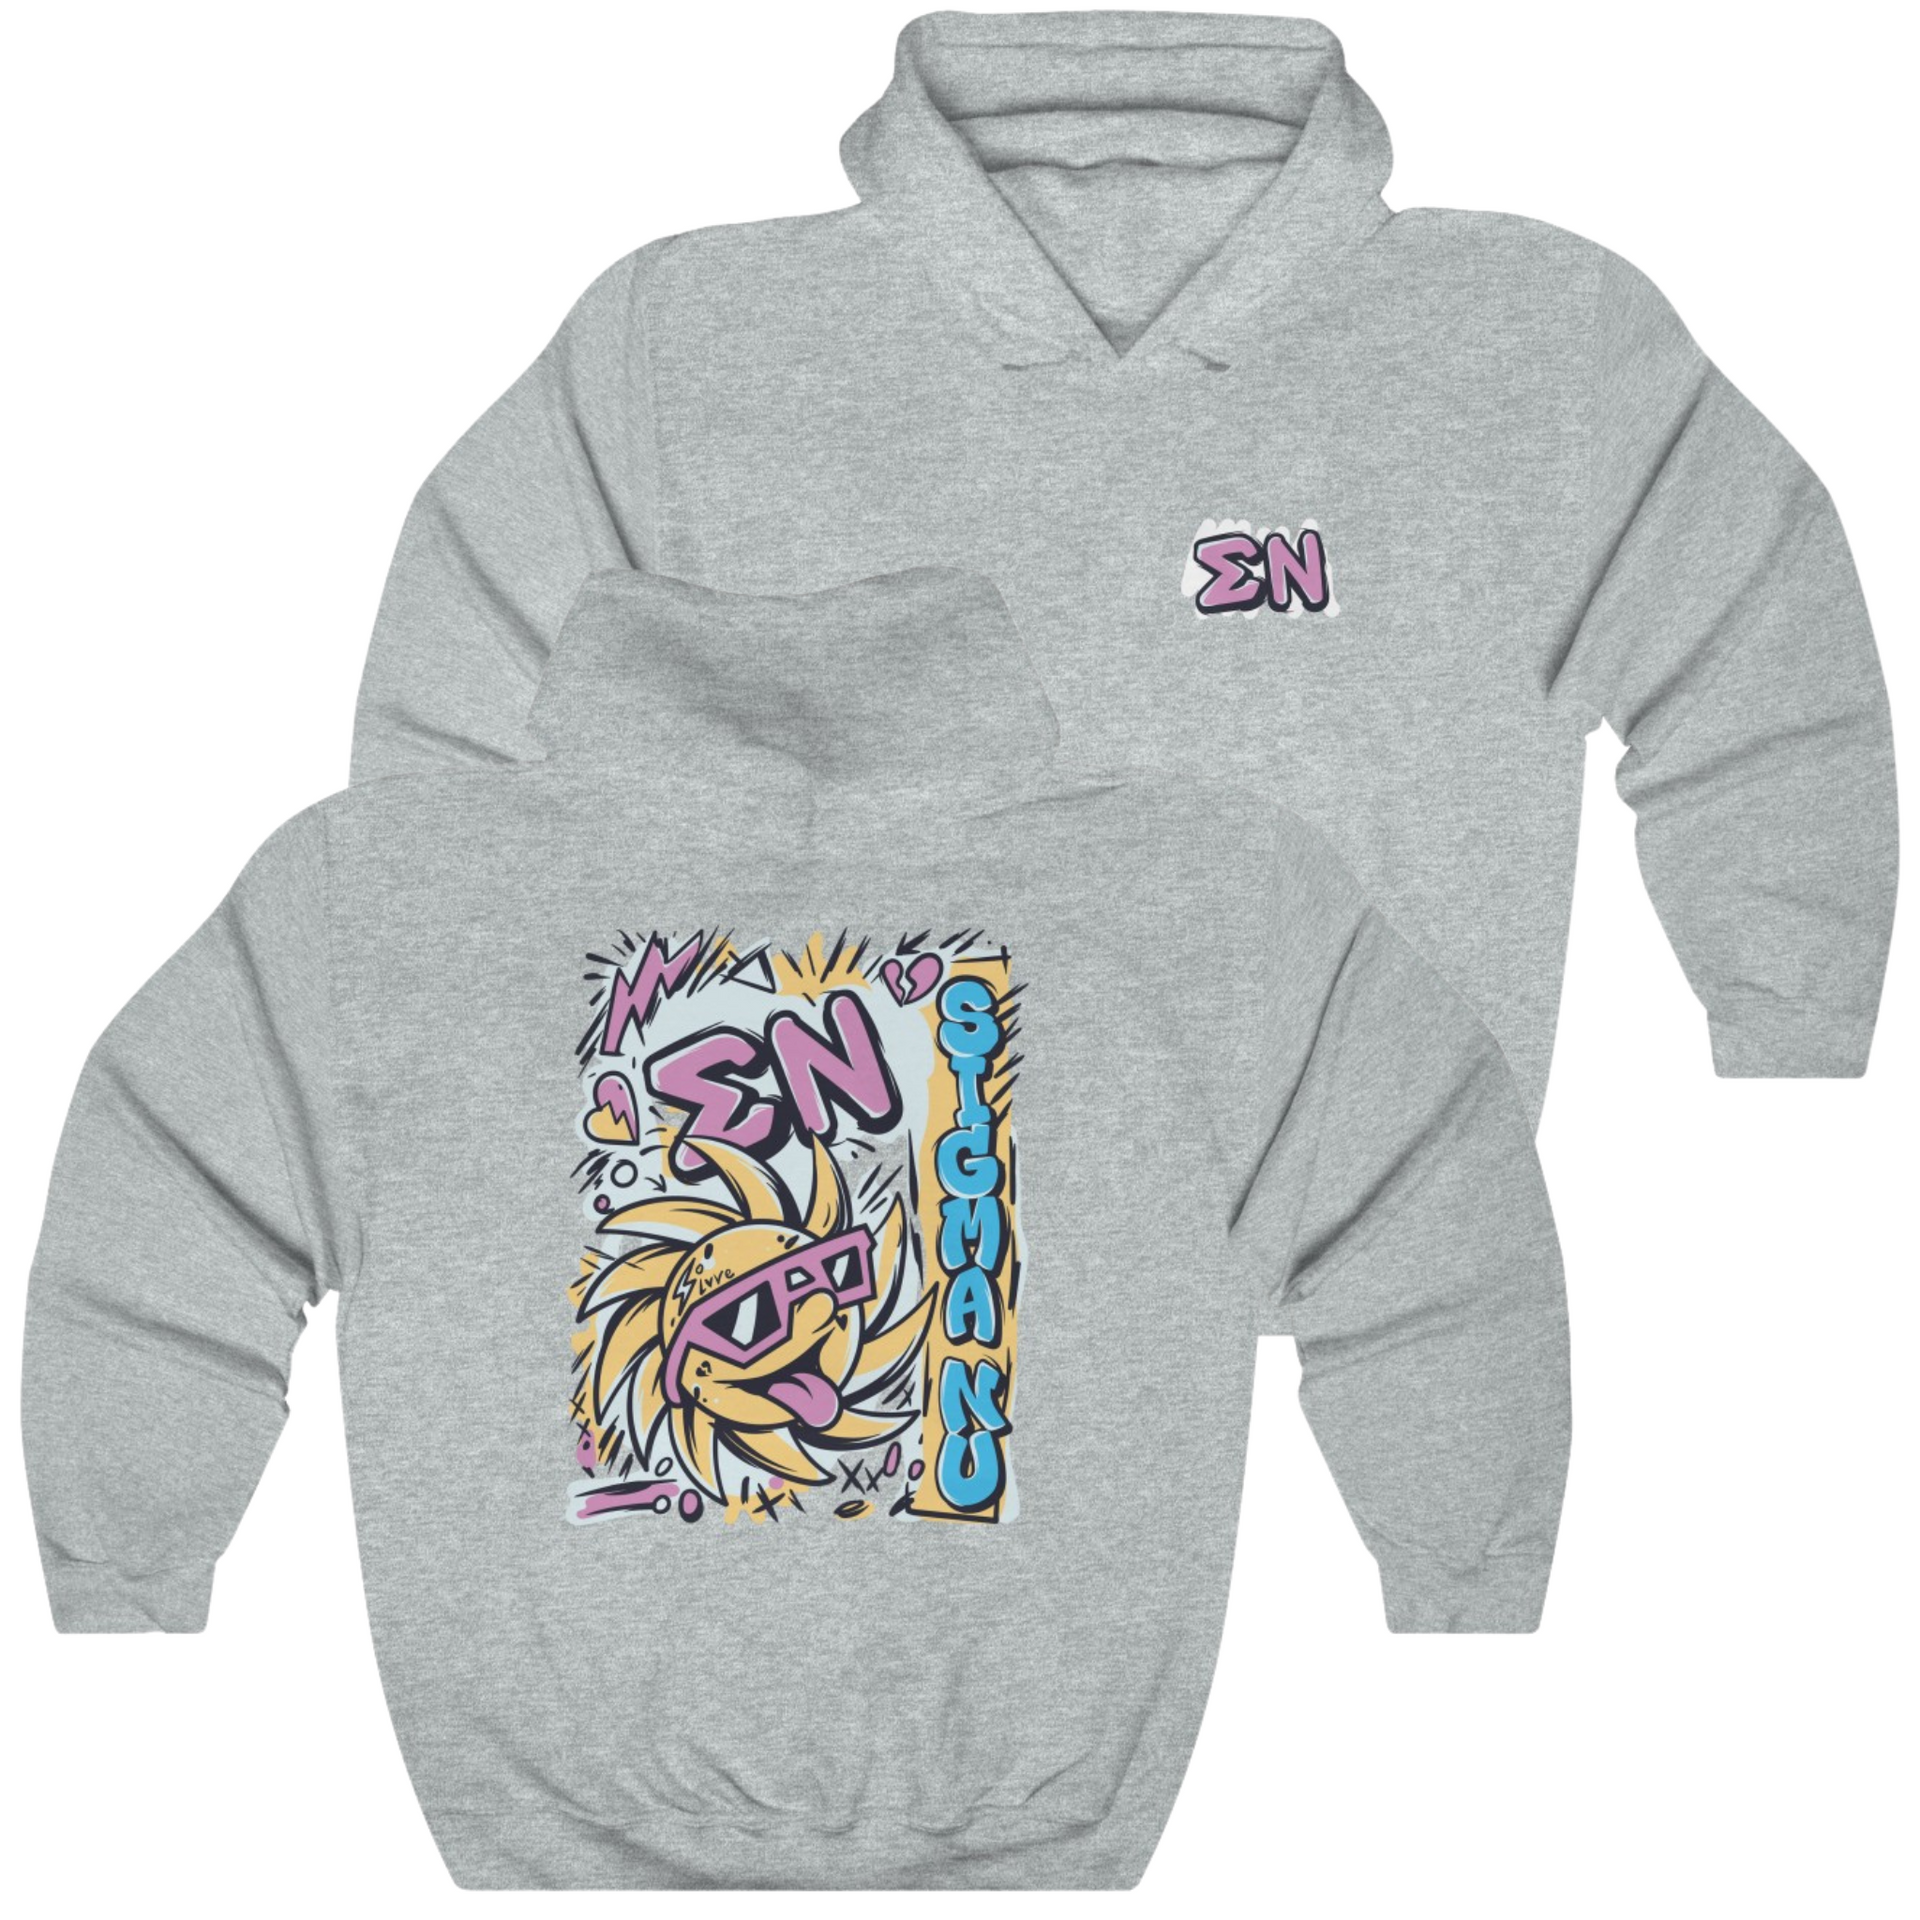 Grey Sigma Nu Graphic Hoodie | Fun in the Sun | Sigma Nu Clothing, Apparel and Merchandise